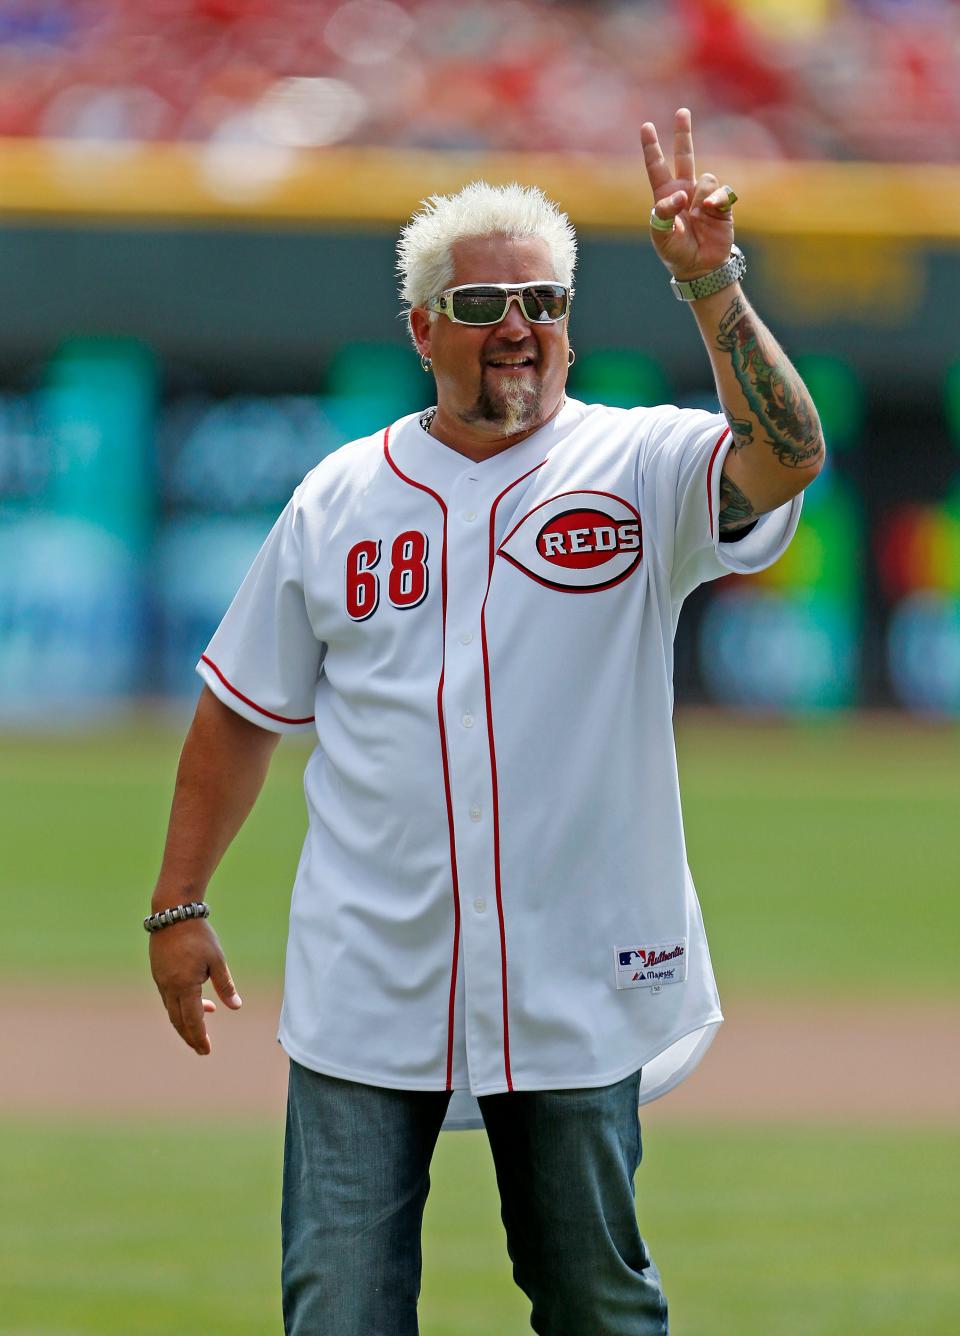 Guy Fieri's April visit to The Governor, a self-styled “modern diner” on Main Street in downtown Milford, will premiere nationally at 9 p.m. Friday.